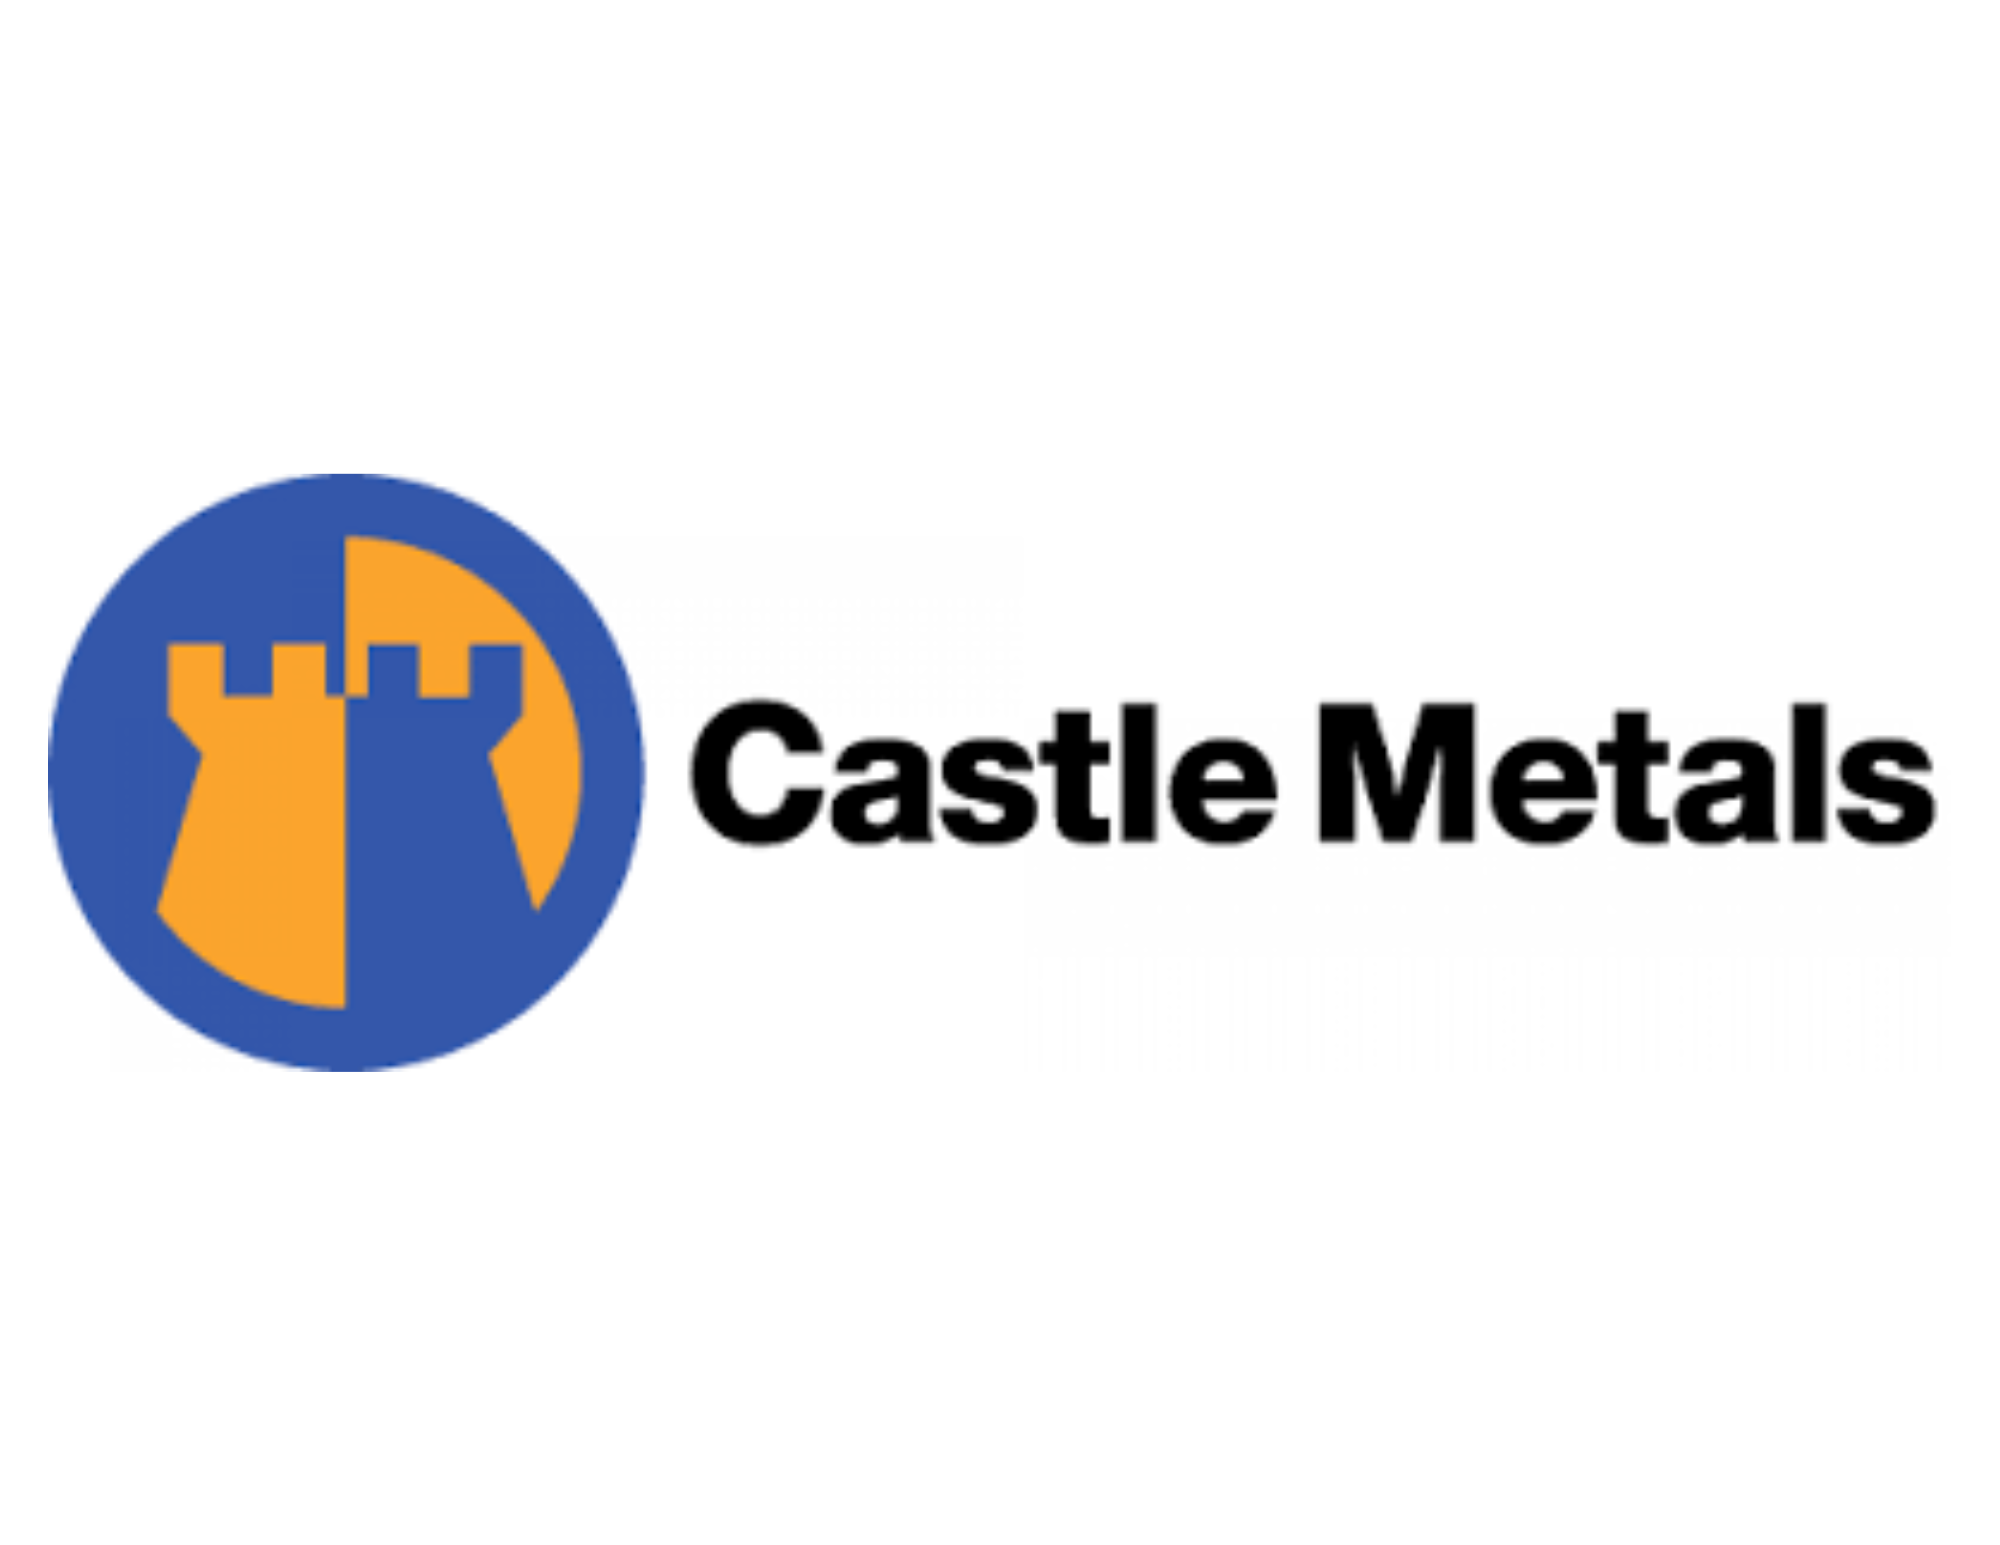 The image displays a logo featuring a stylized castle silhouette in yellow with a blue background, next to the words 